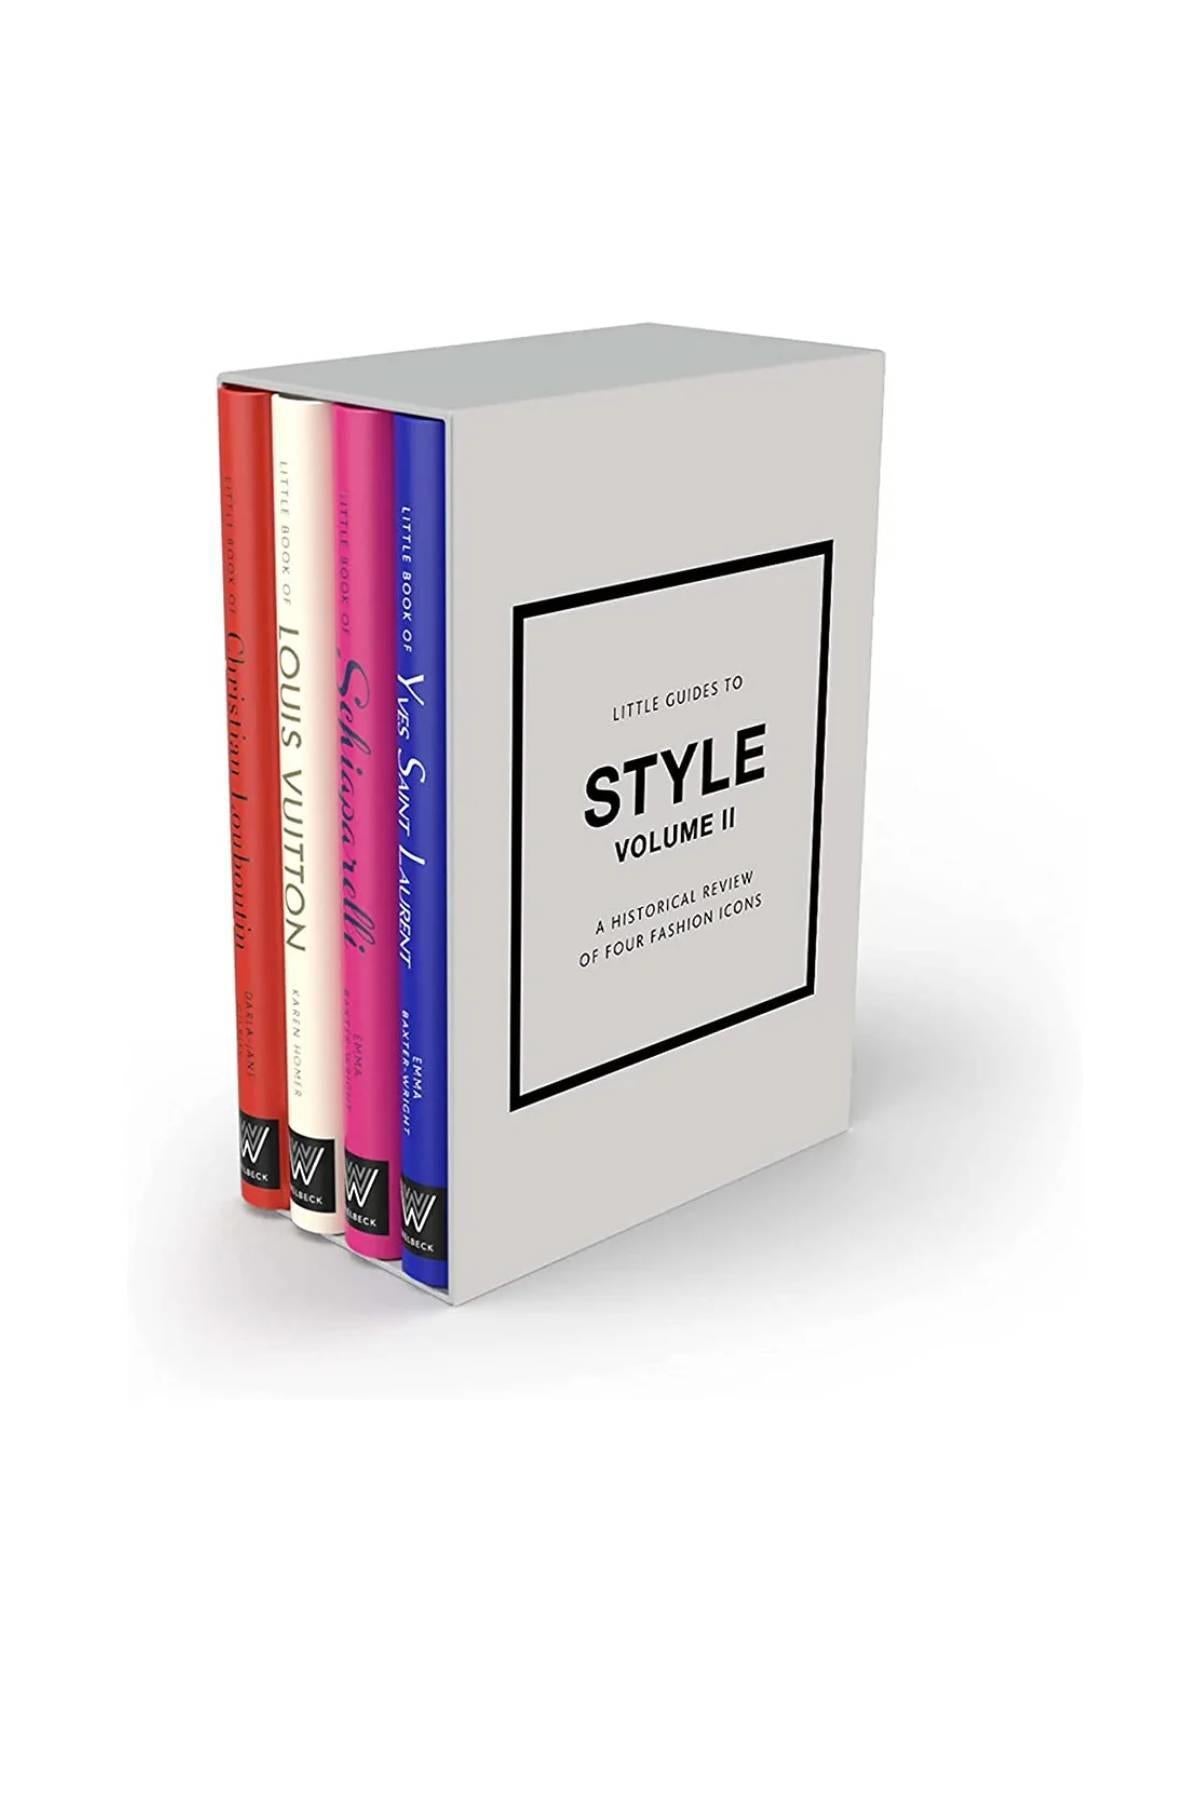 Little Guides To Style II Book